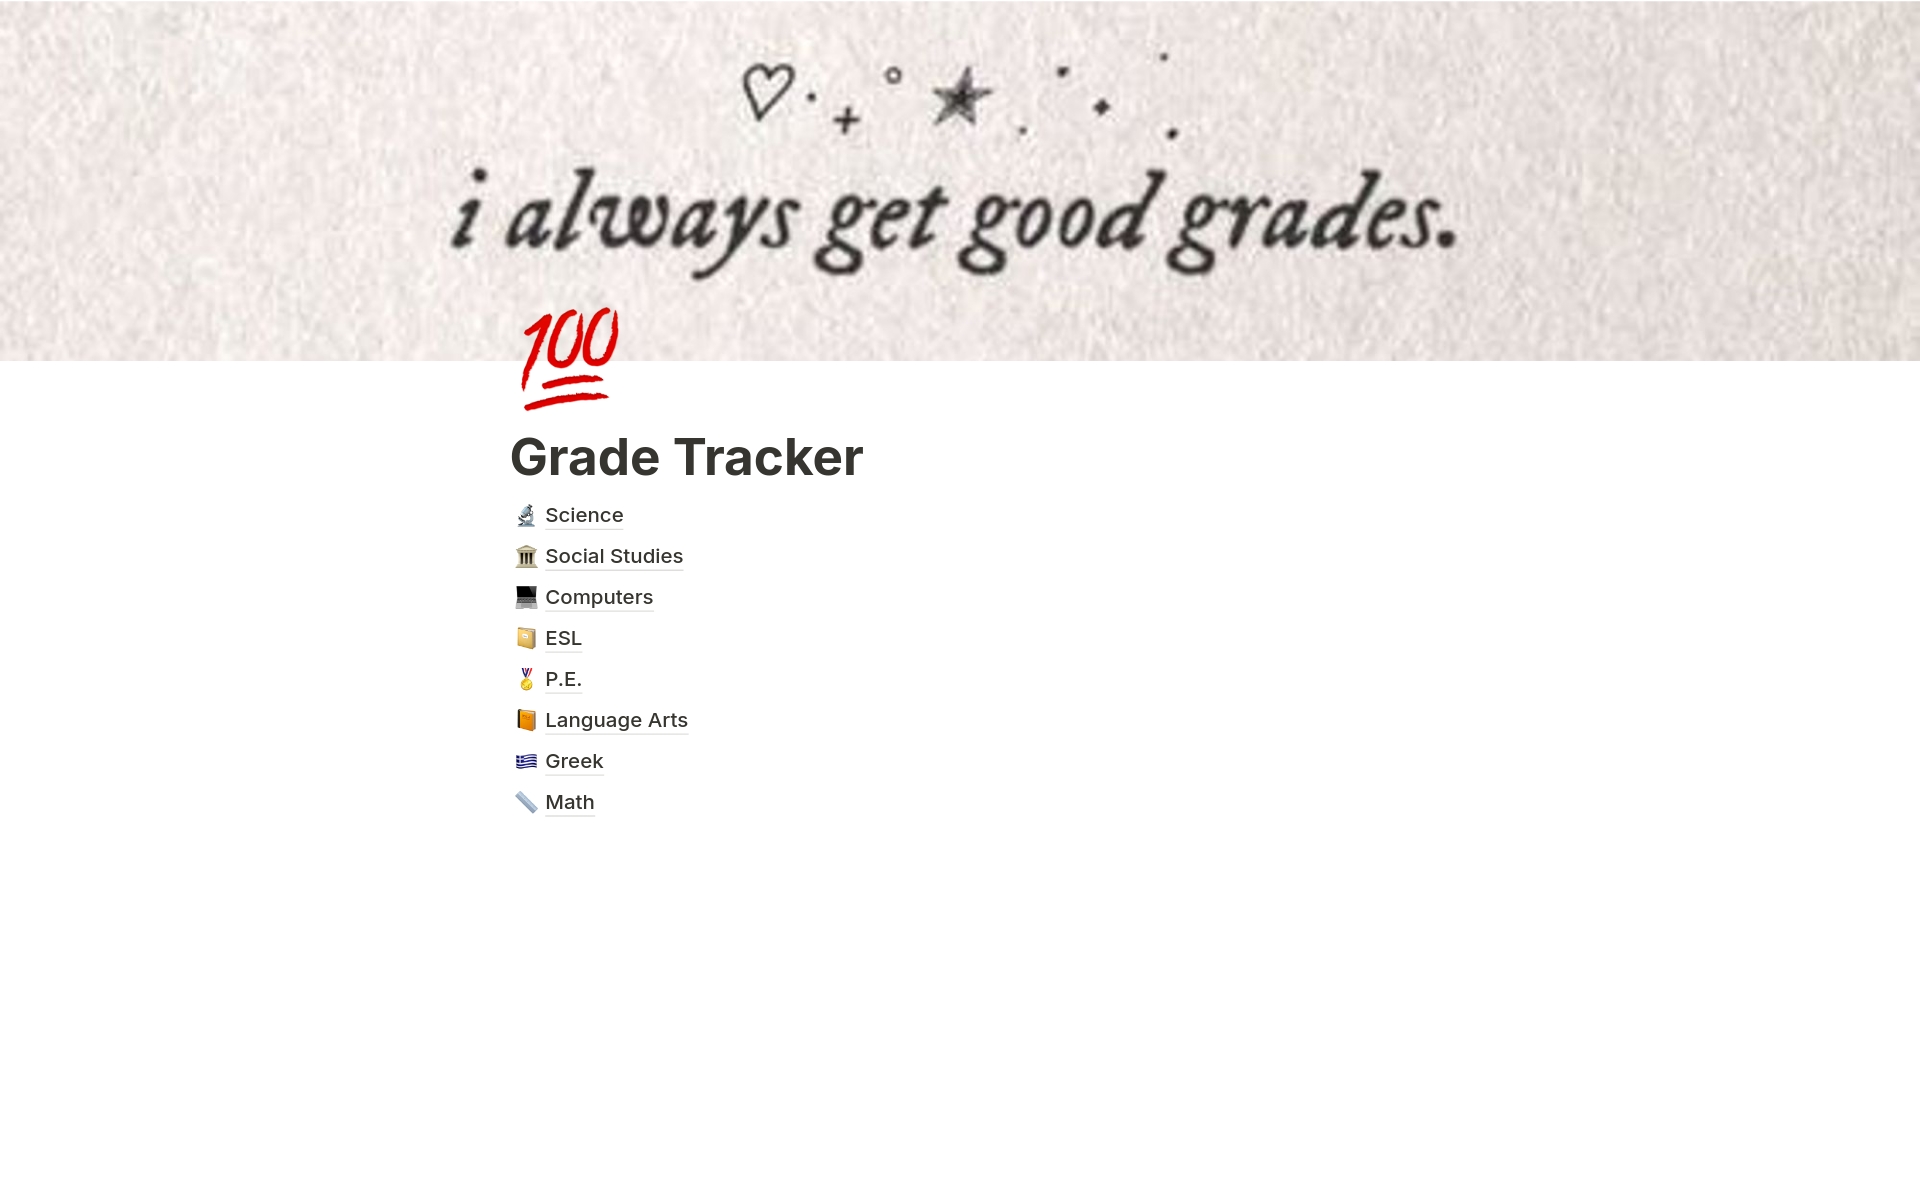 Hey there! I am Carmen. I am a student who enjoys studying. I make aesthetic planners for free! This is a grade tracker I designed for students who need an overview of their grades.